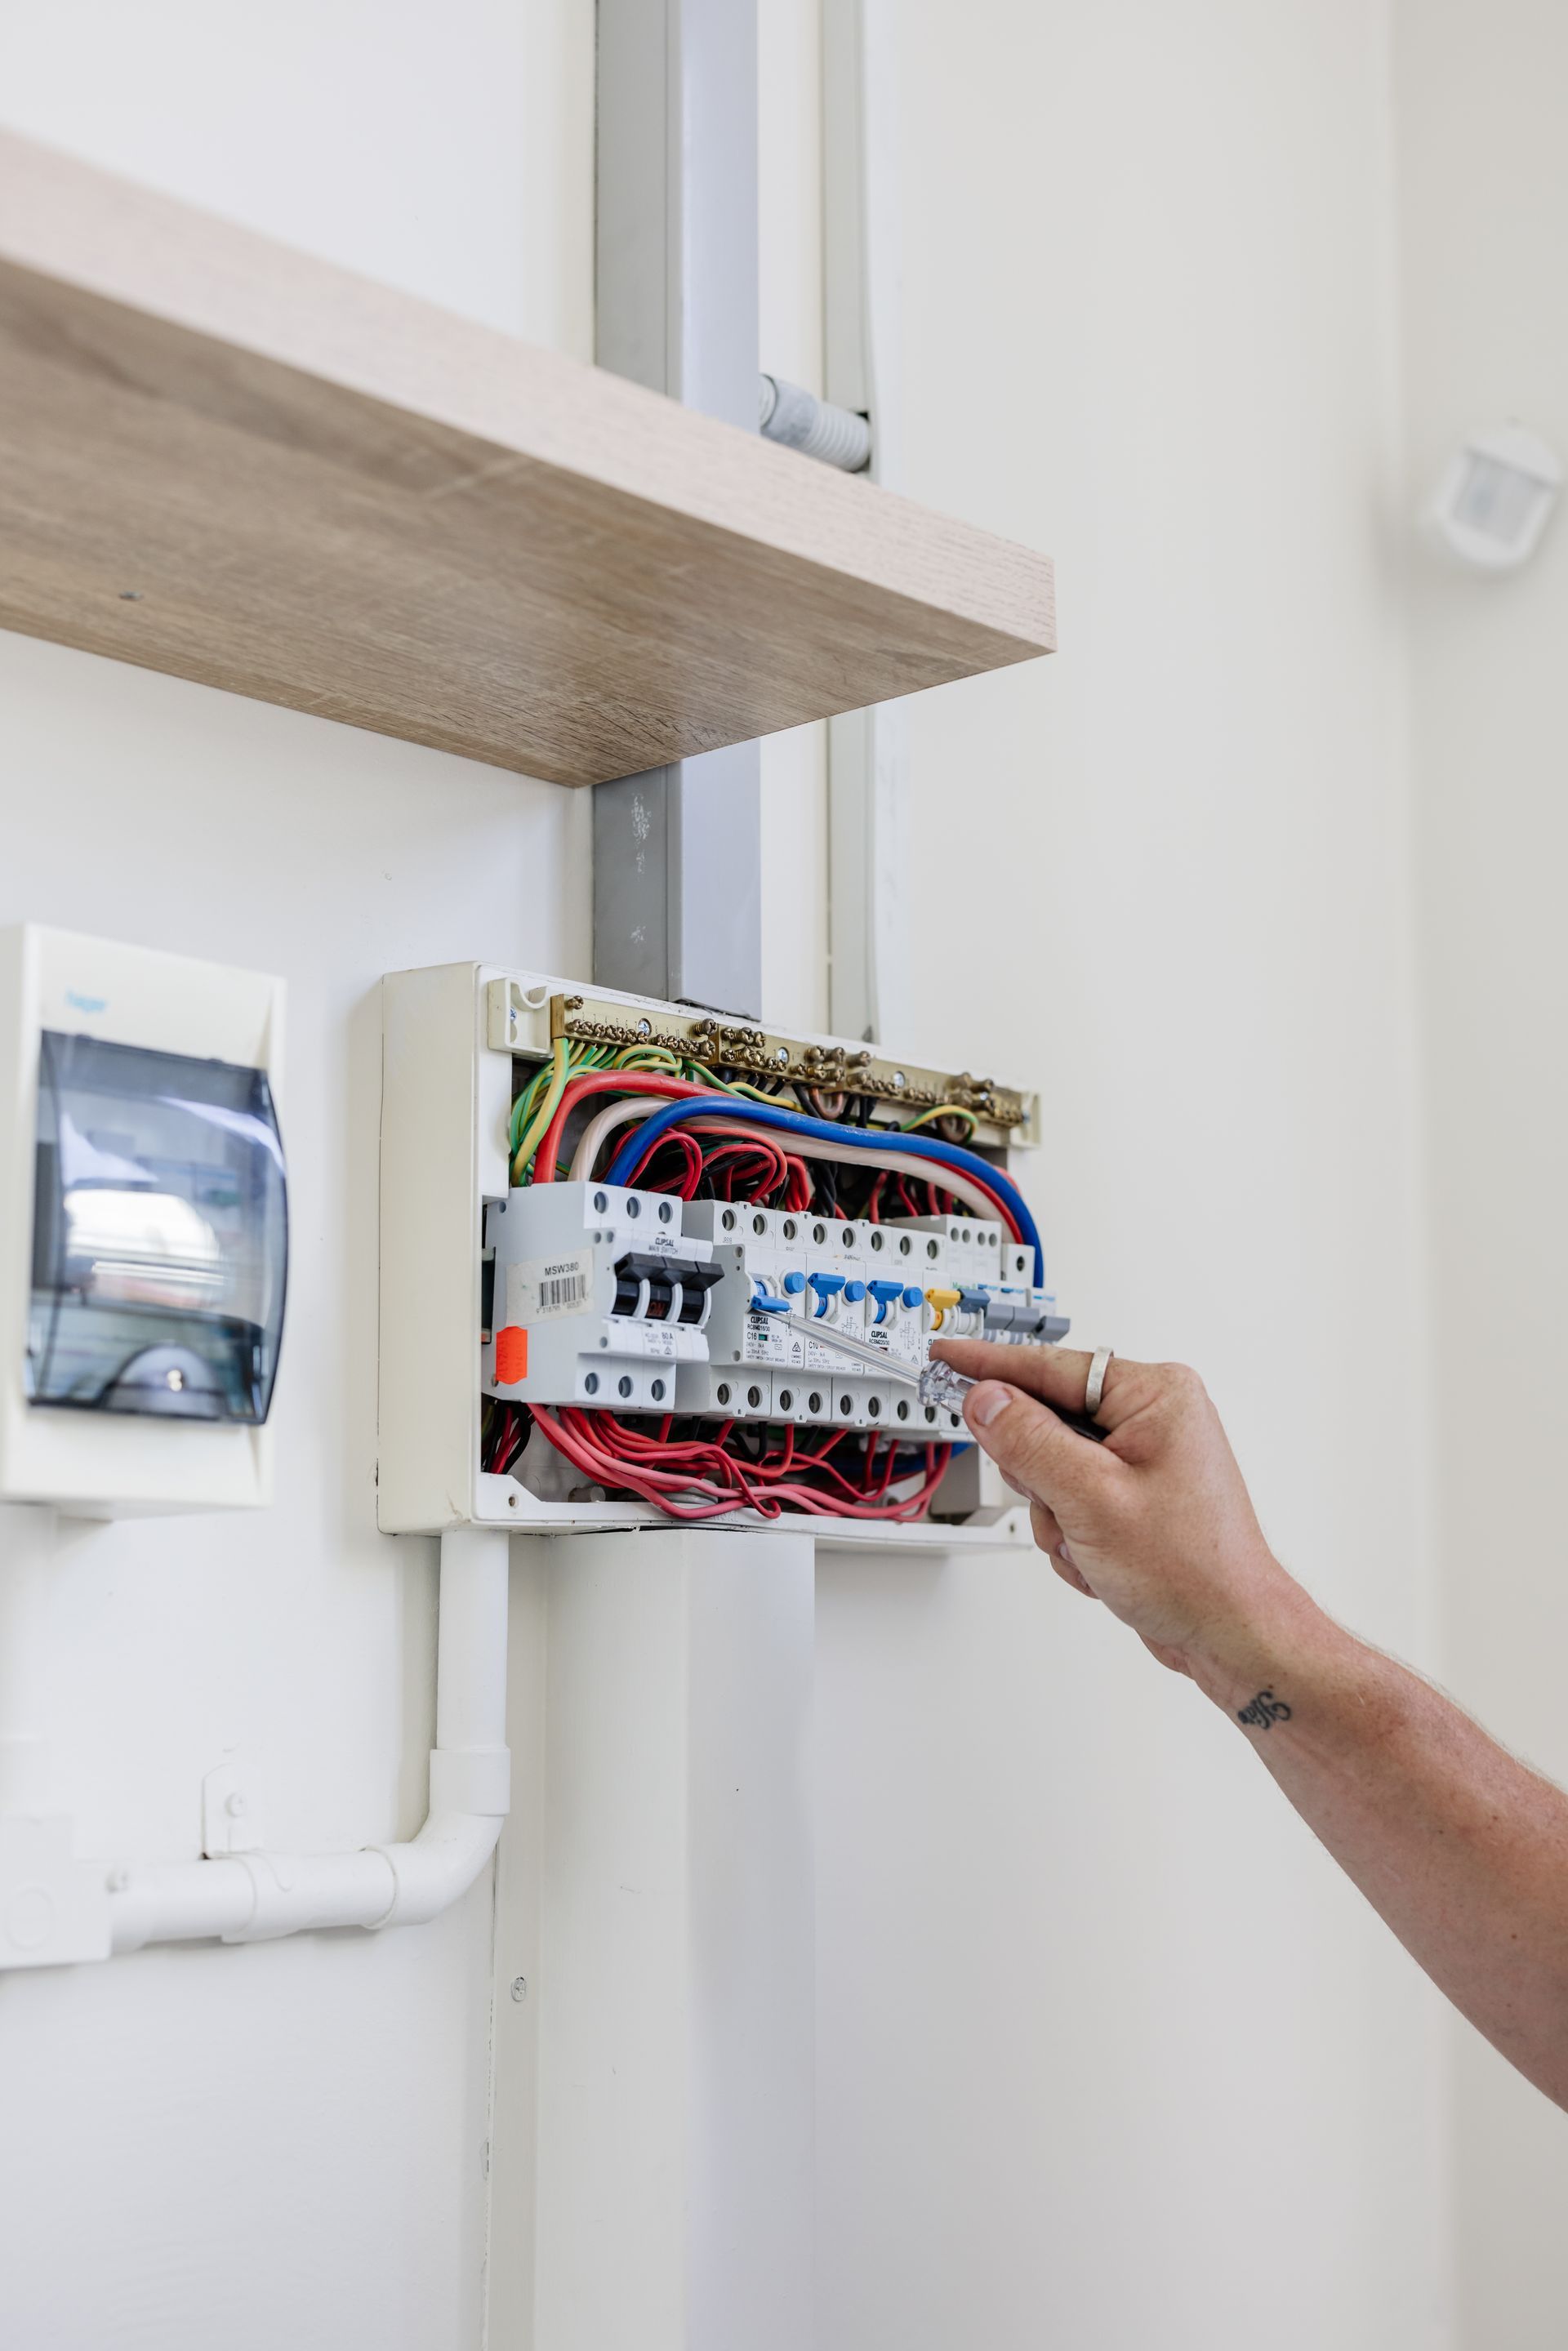 How Electrical Upgrades Can Save You Money